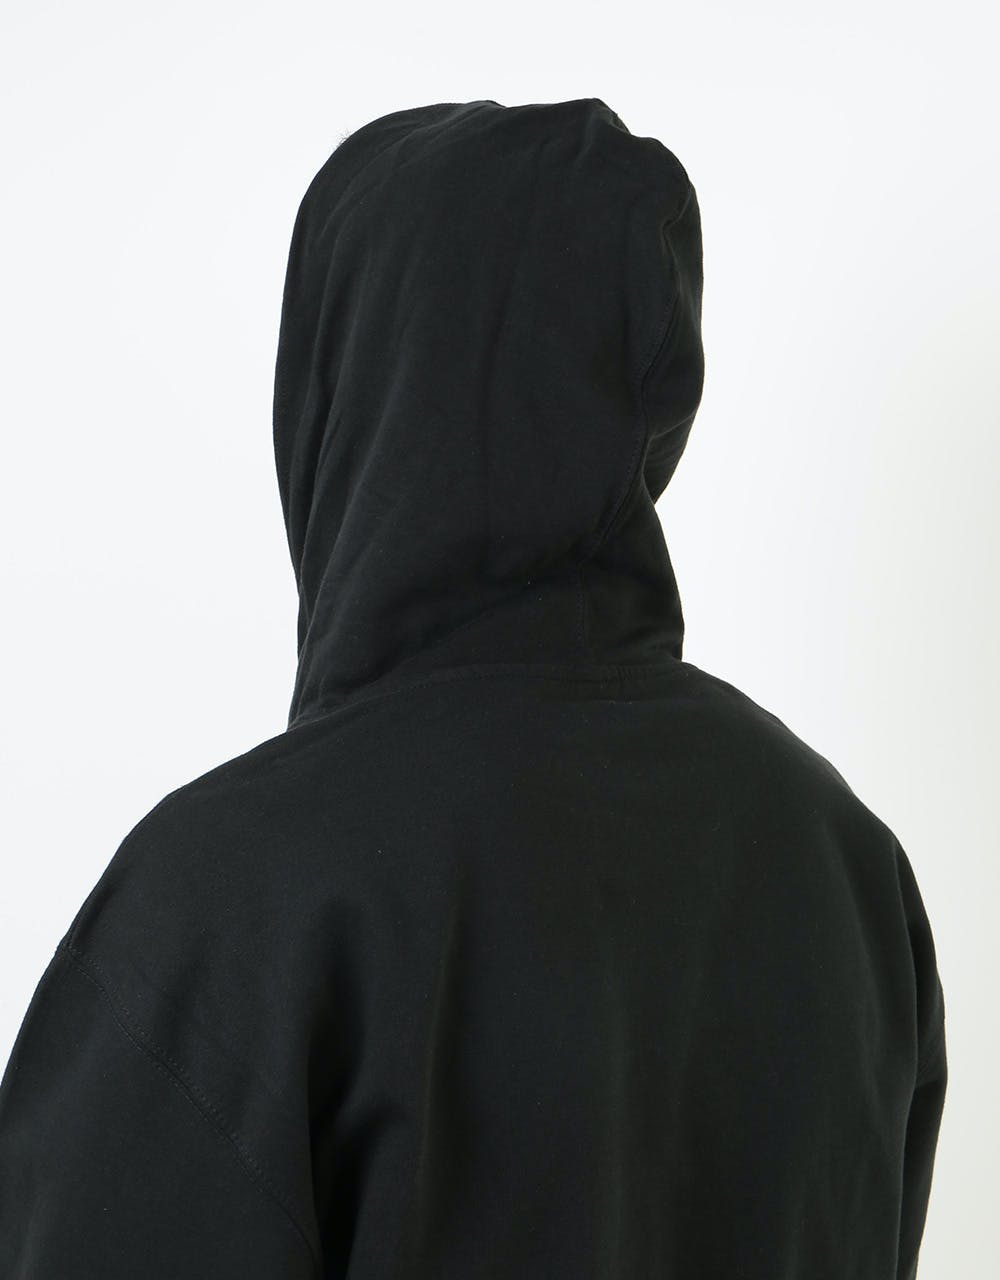 Girl x Sean Cliver Skull of Fame Pullover Hoodie - Black